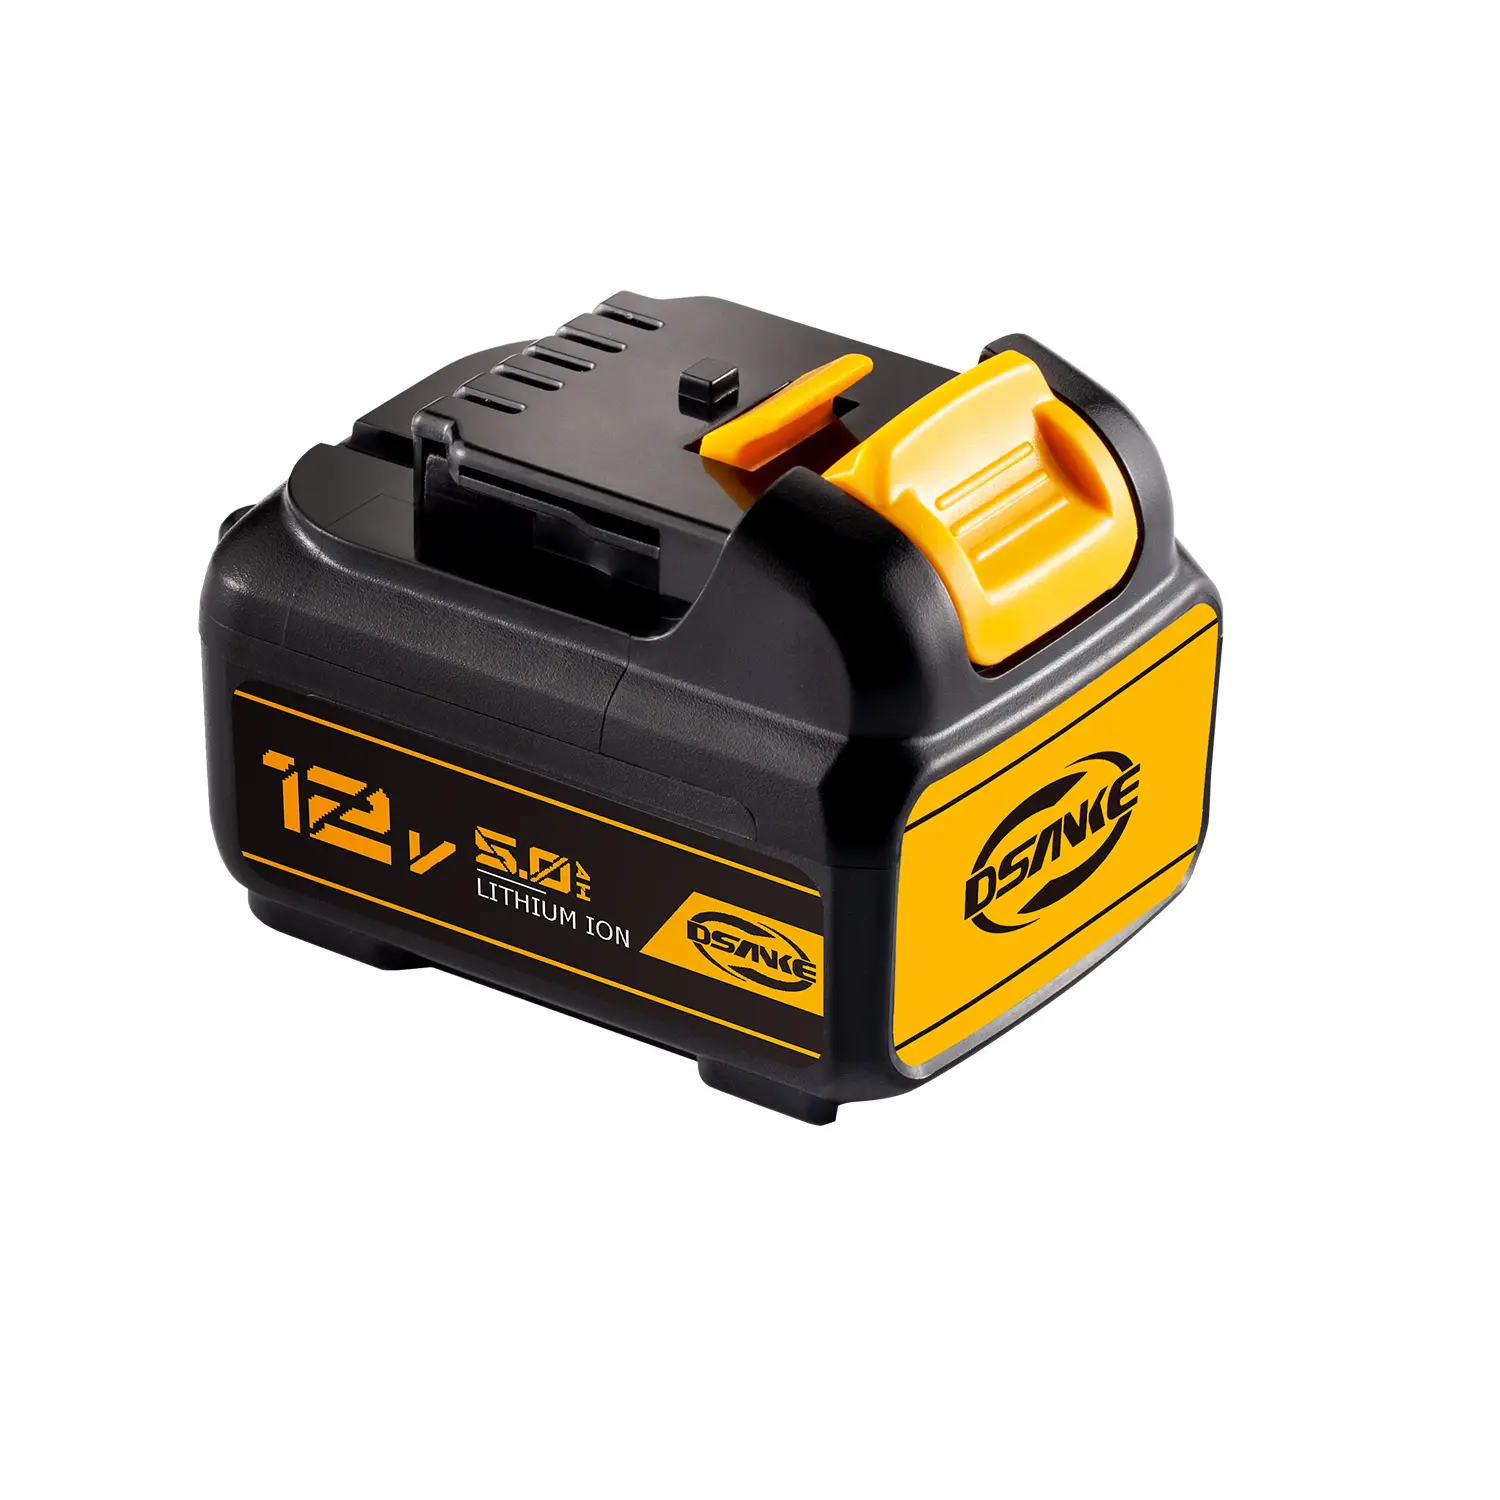 Customized high capacity 12V 5AH battery with LED indicator Replacement cordless drill DCB120 power tool battery For Dewalts